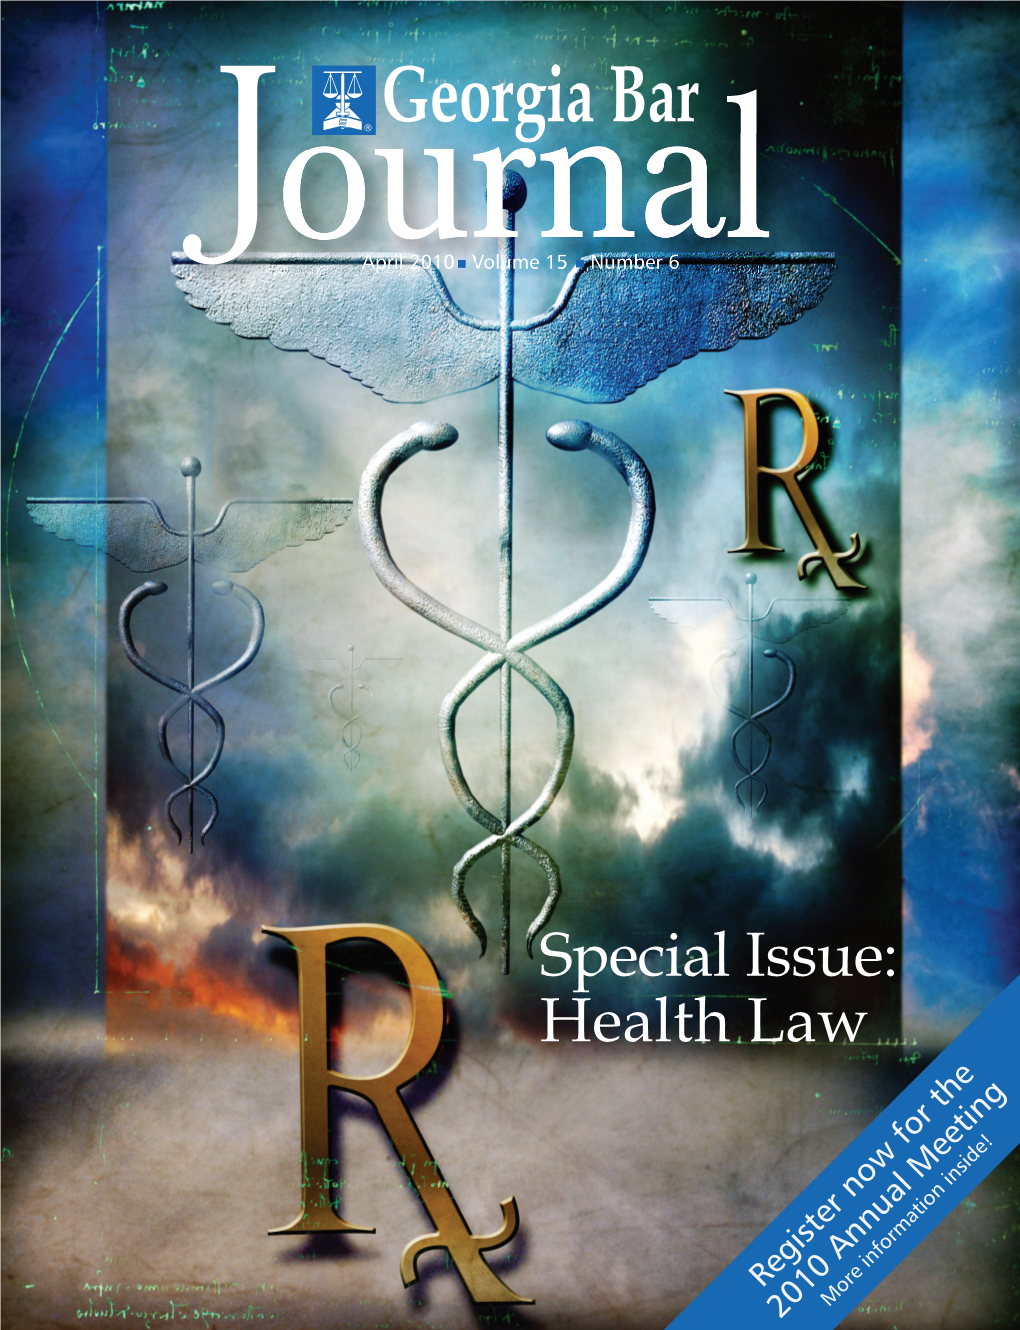 Special Issue: Health Law